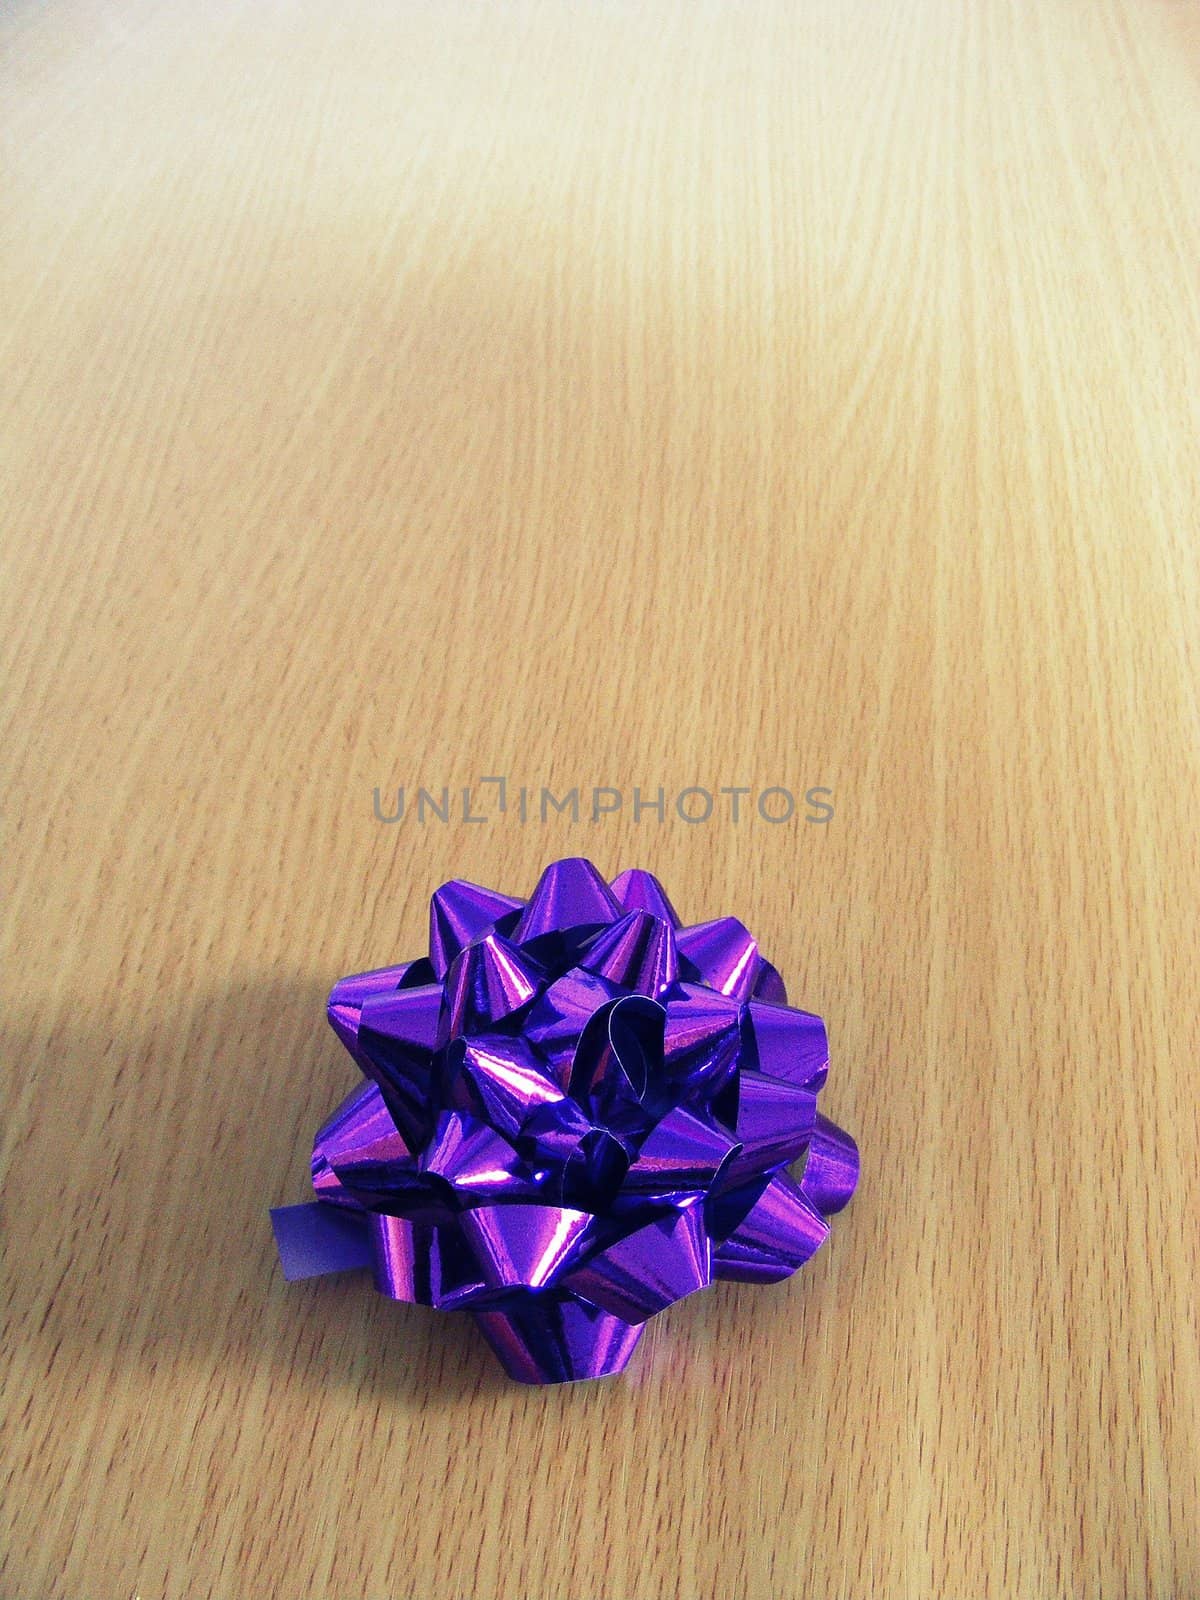 A photograph of a purple tinsel gift decoration.